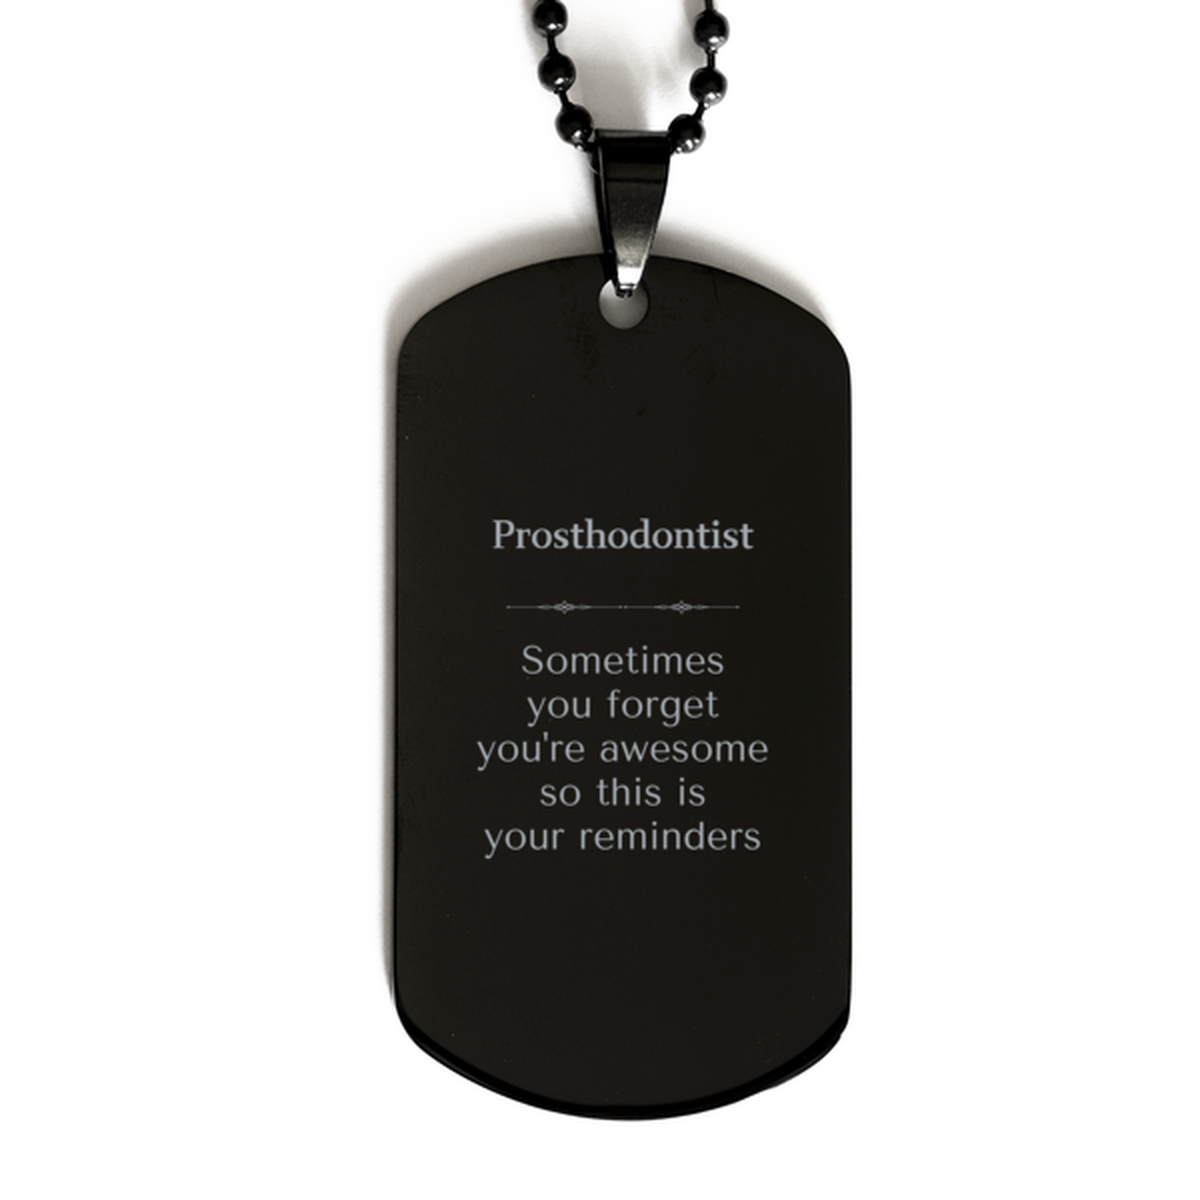 Sentimental Prosthodontist Black Dog Tag, Prosthodontist Sometimes you forget you're awesome so this is your reminders, Graduation Christmas Birthday Gifts for Prosthodontist, Men, Women, Coworkers